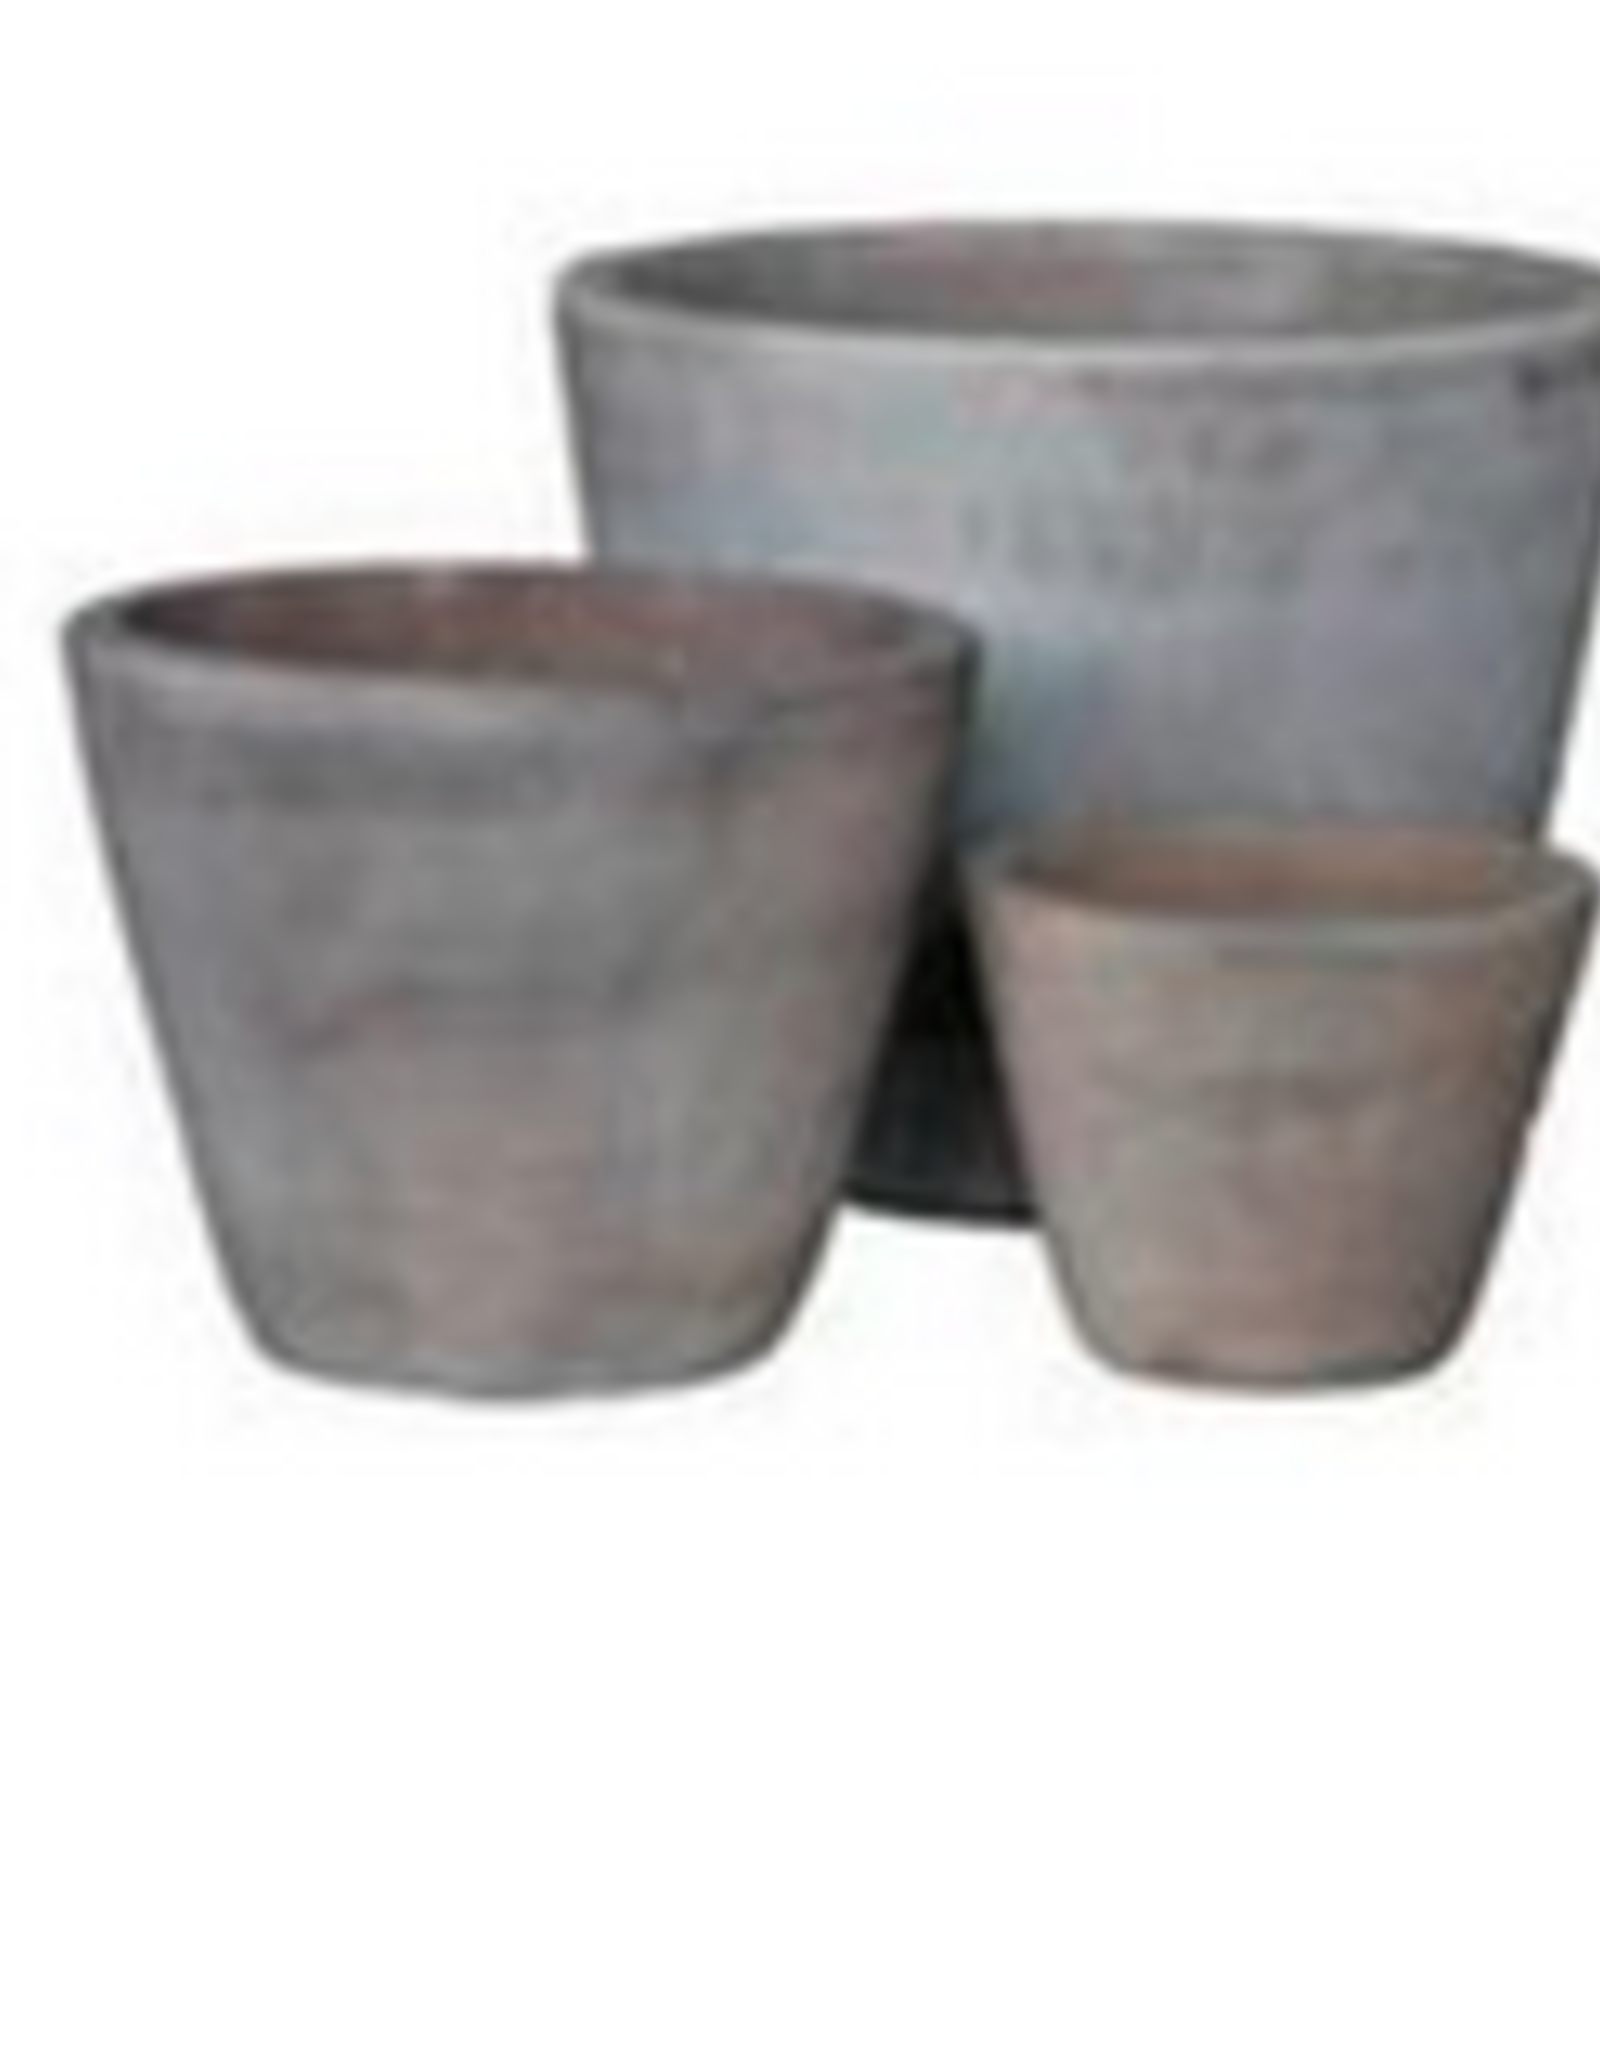 Large Tapered Terracotta Pot D15.3" H12.2"